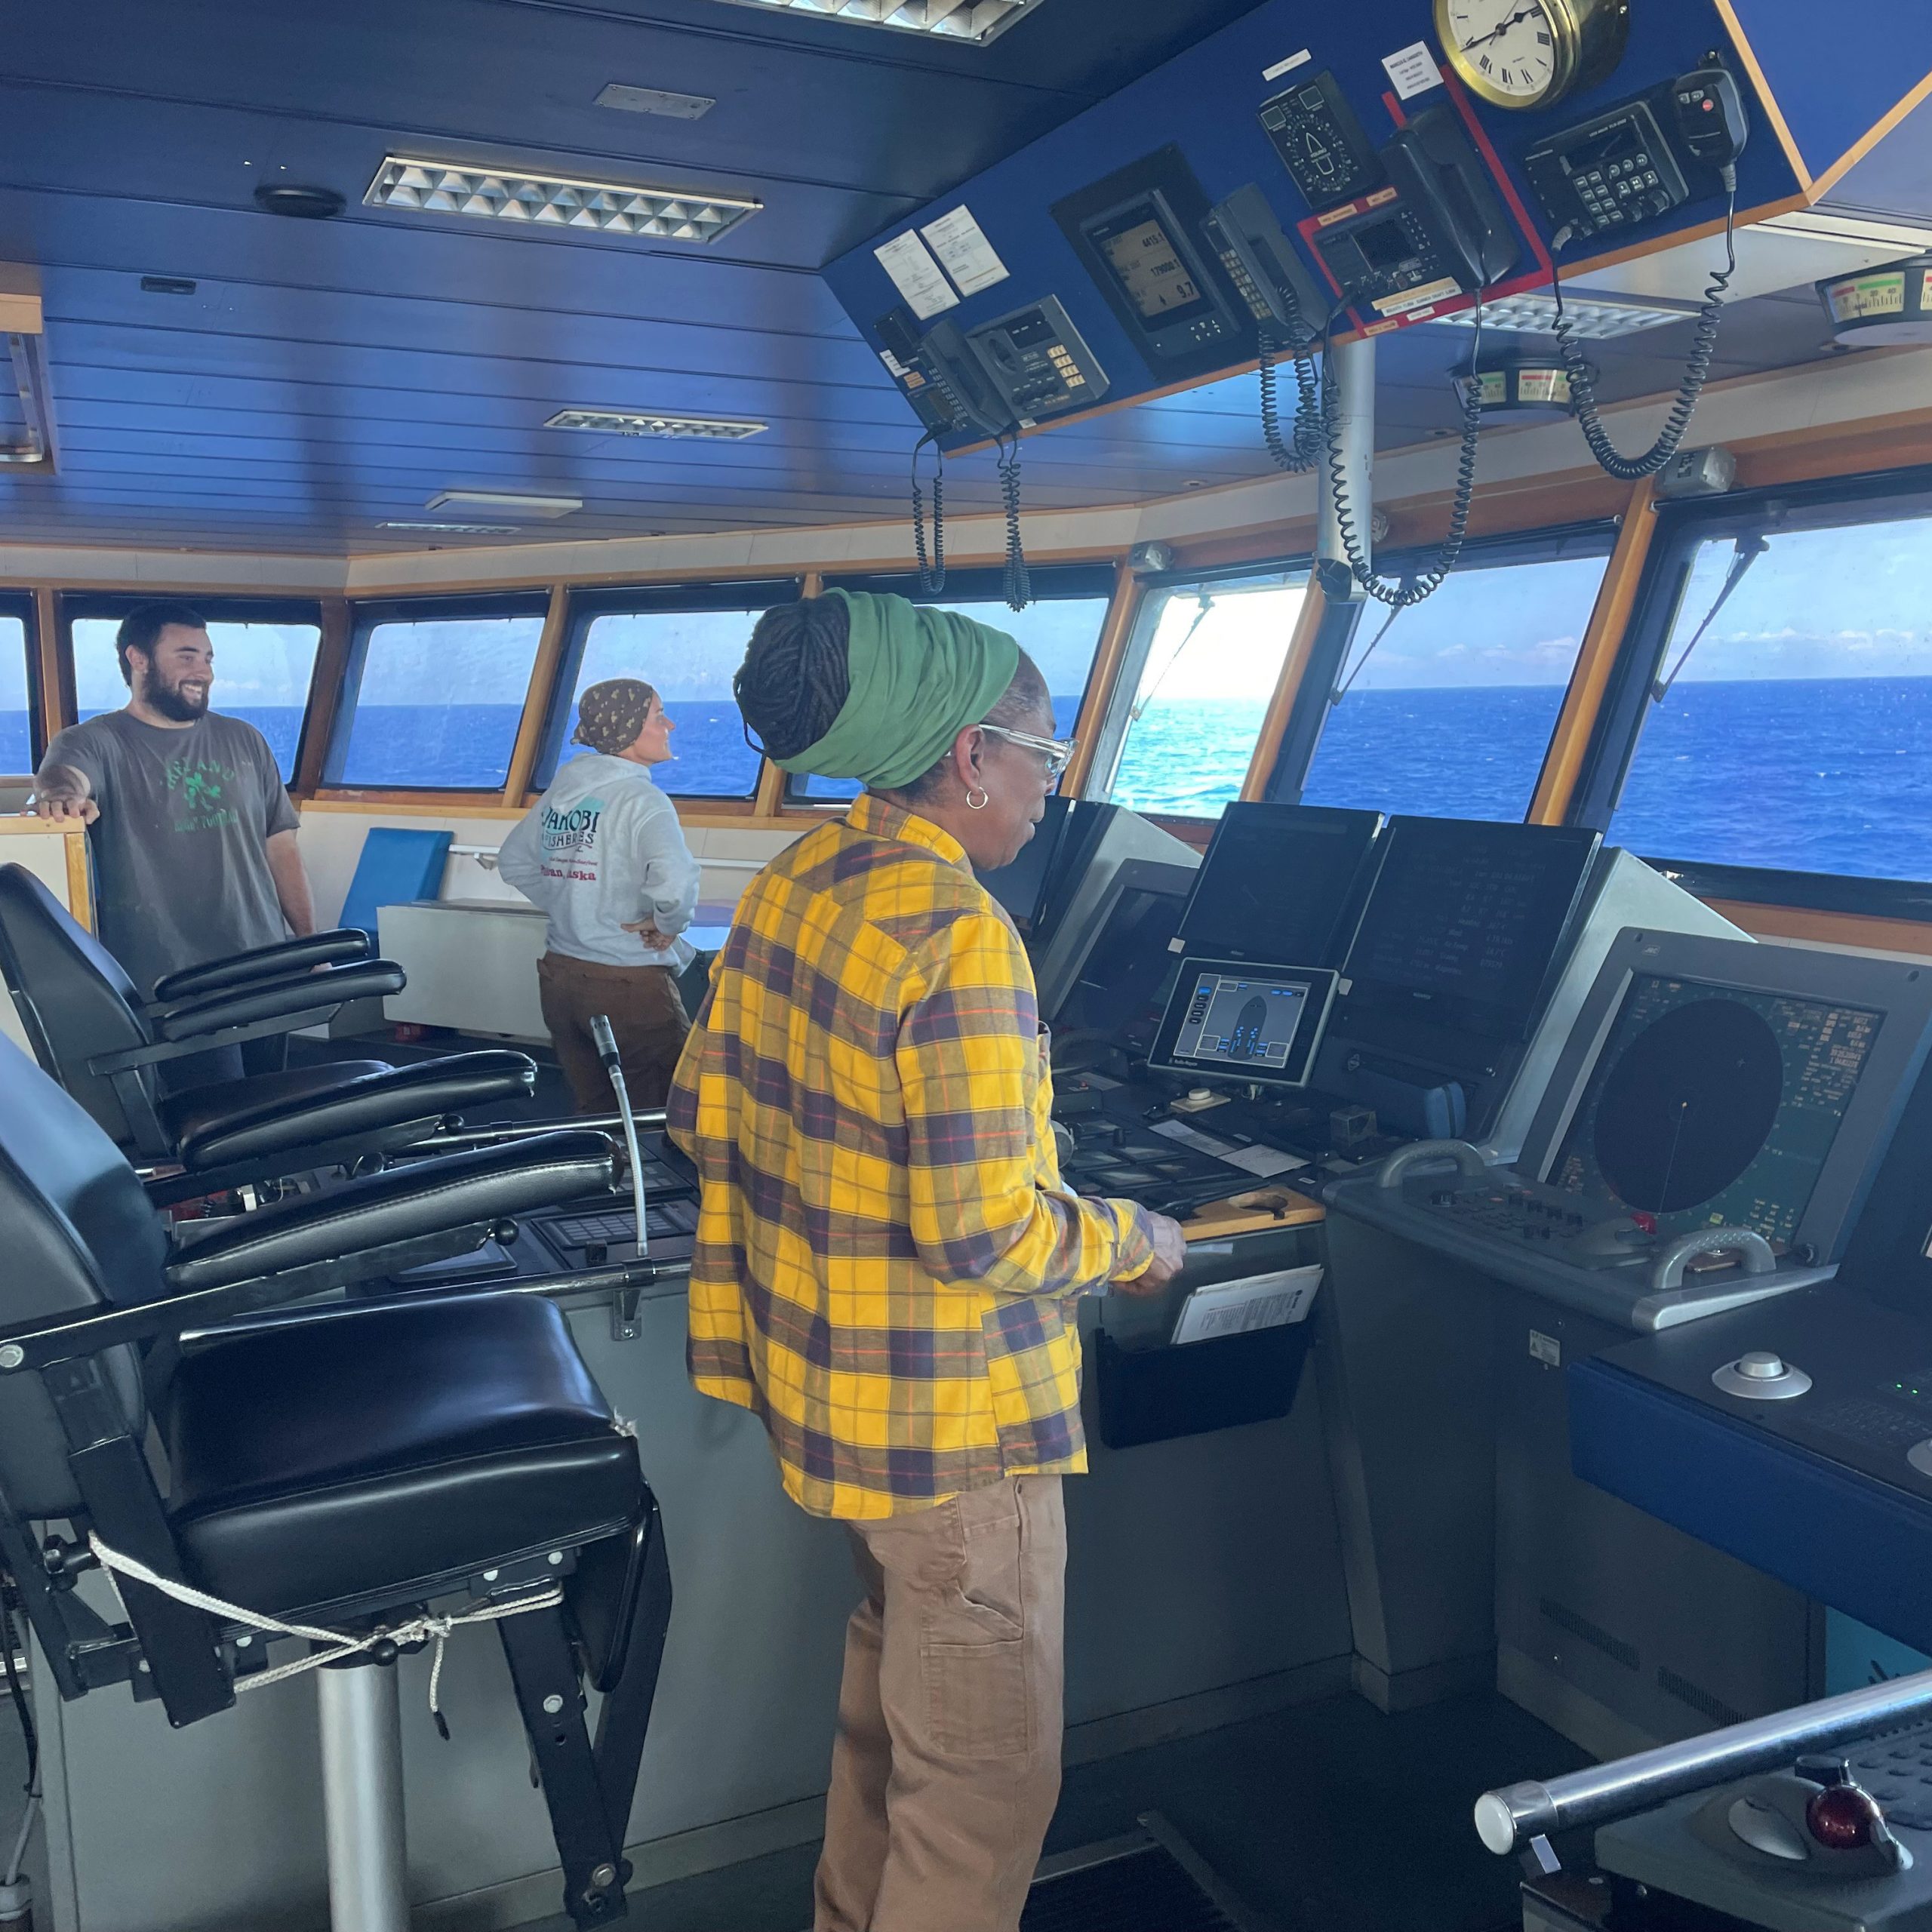 Joselyn White, 2nd Mate, monitoring the Bridge, with Gerry McLamon and Lindsay Daniels, both Able Seamen (AB), standing watch on R/V Marcus G. Langseth.